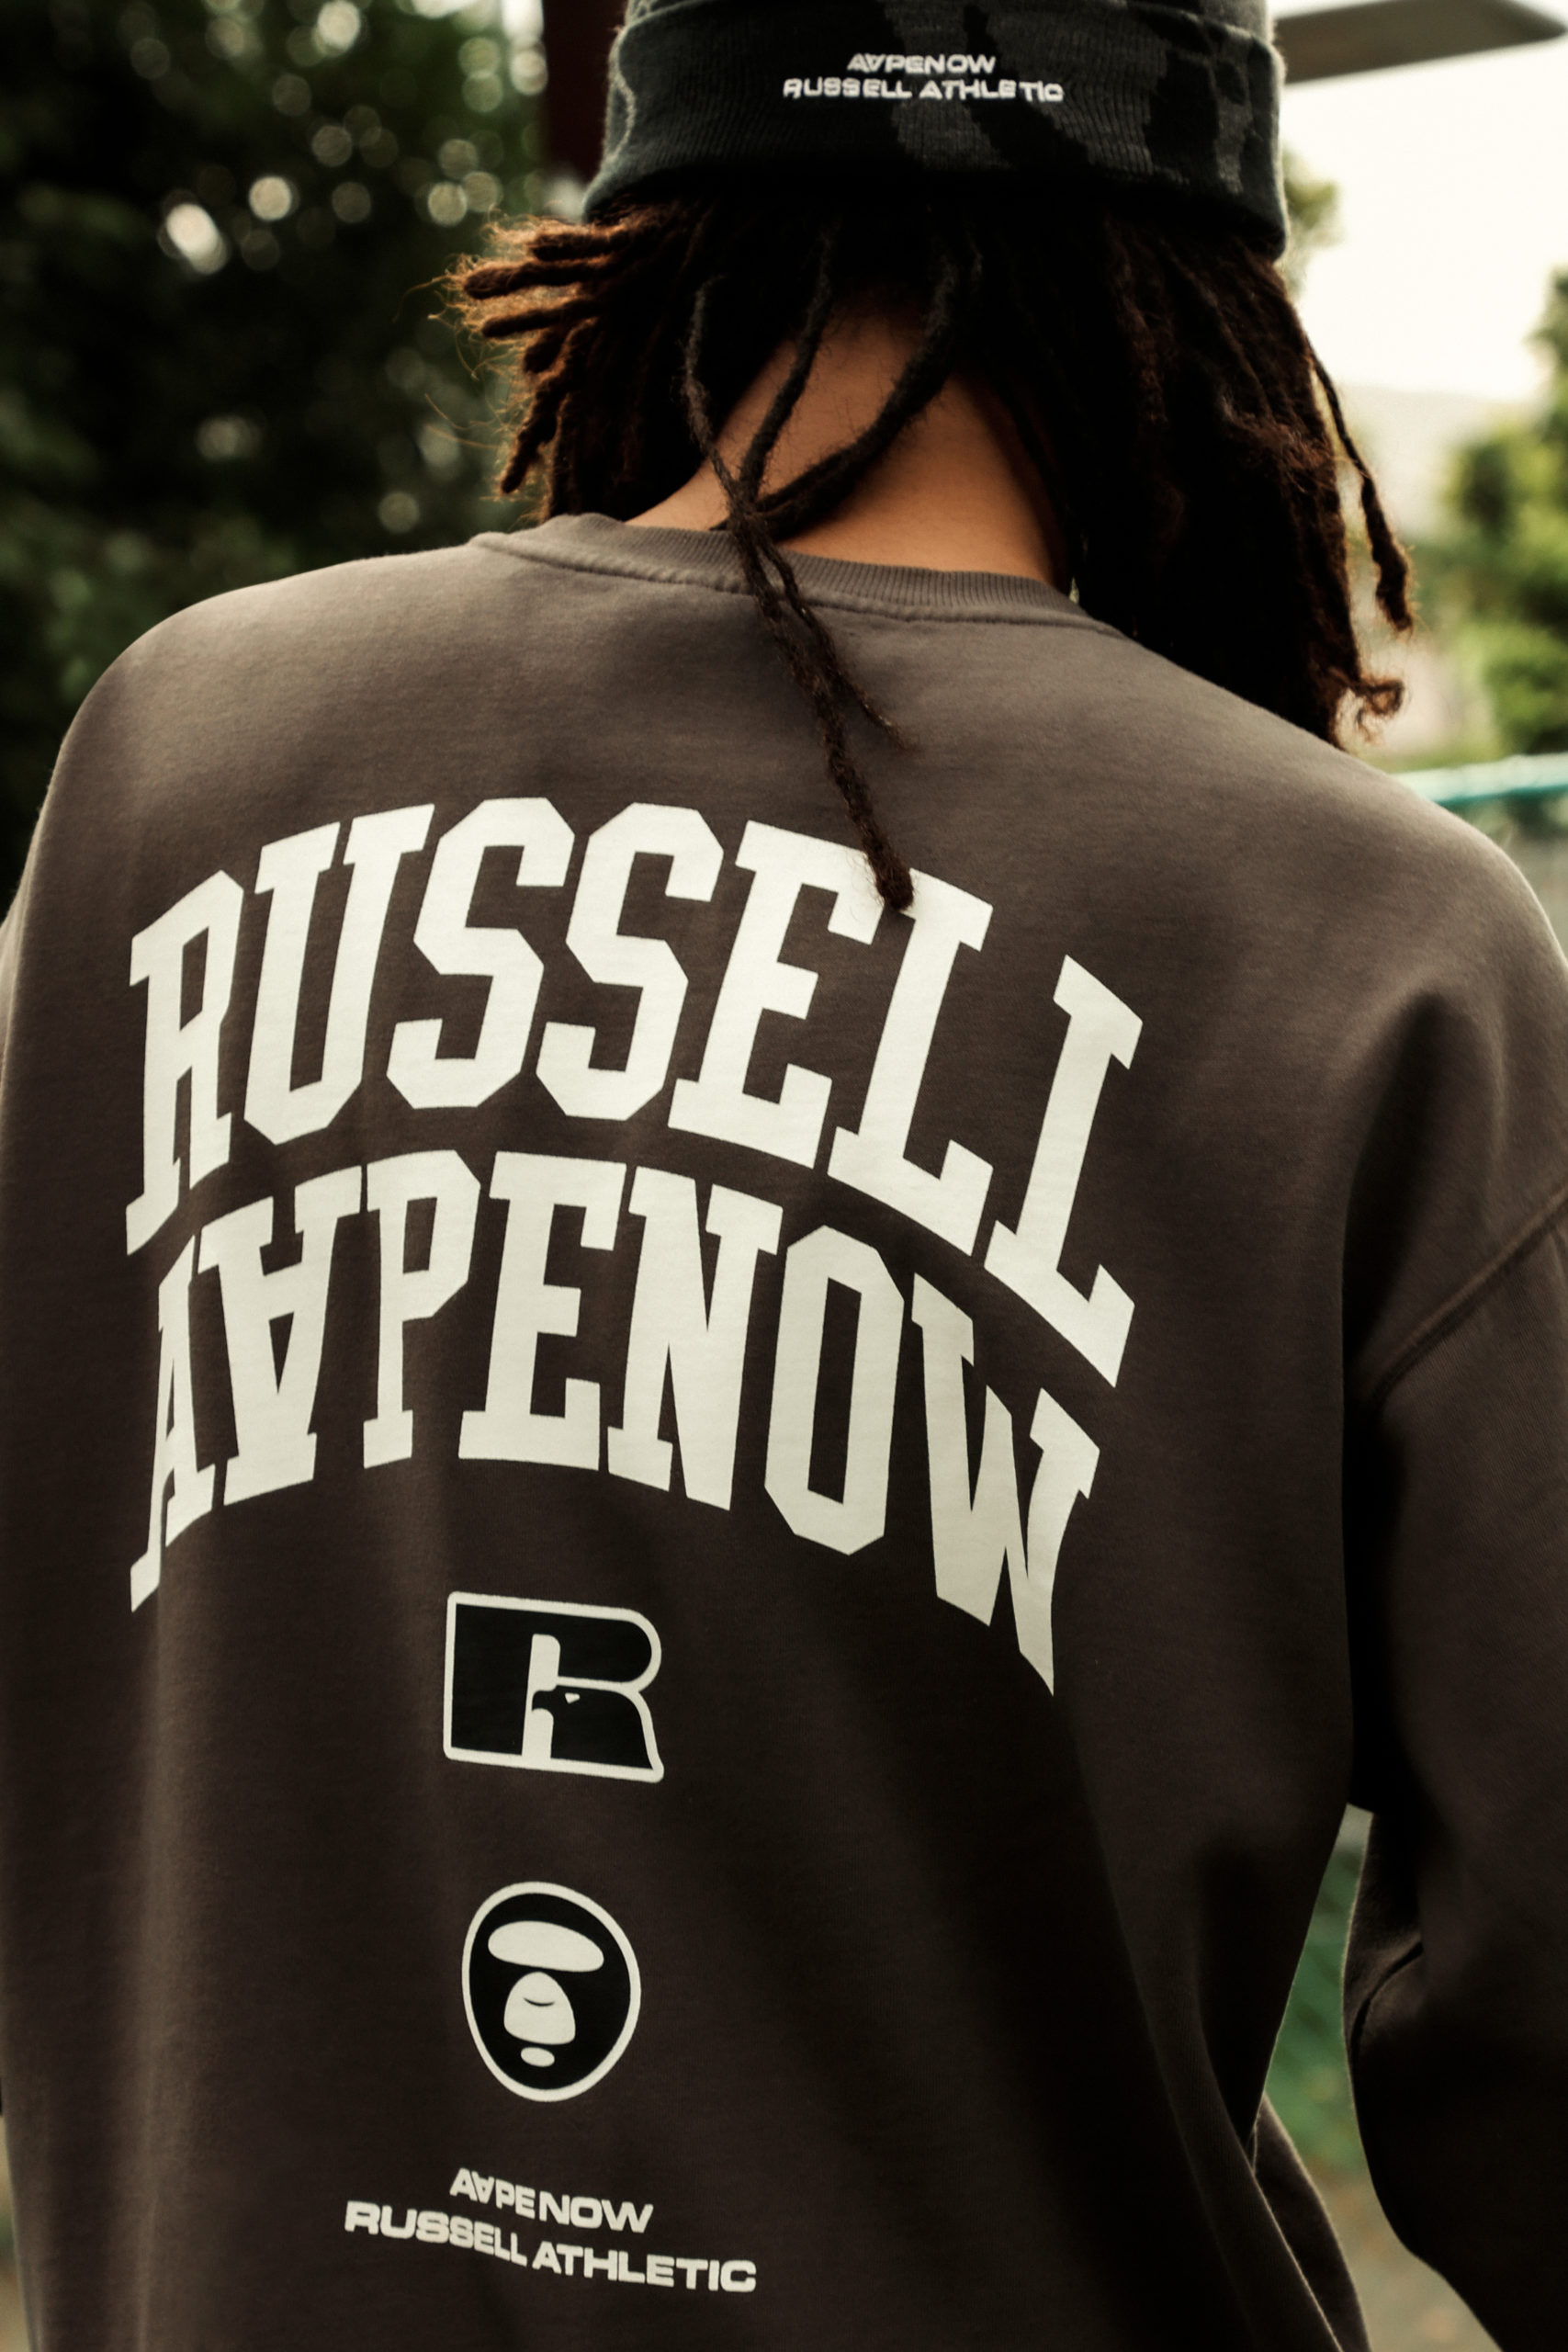 Russell Athletic and fingercroxx Make the Perfect Team